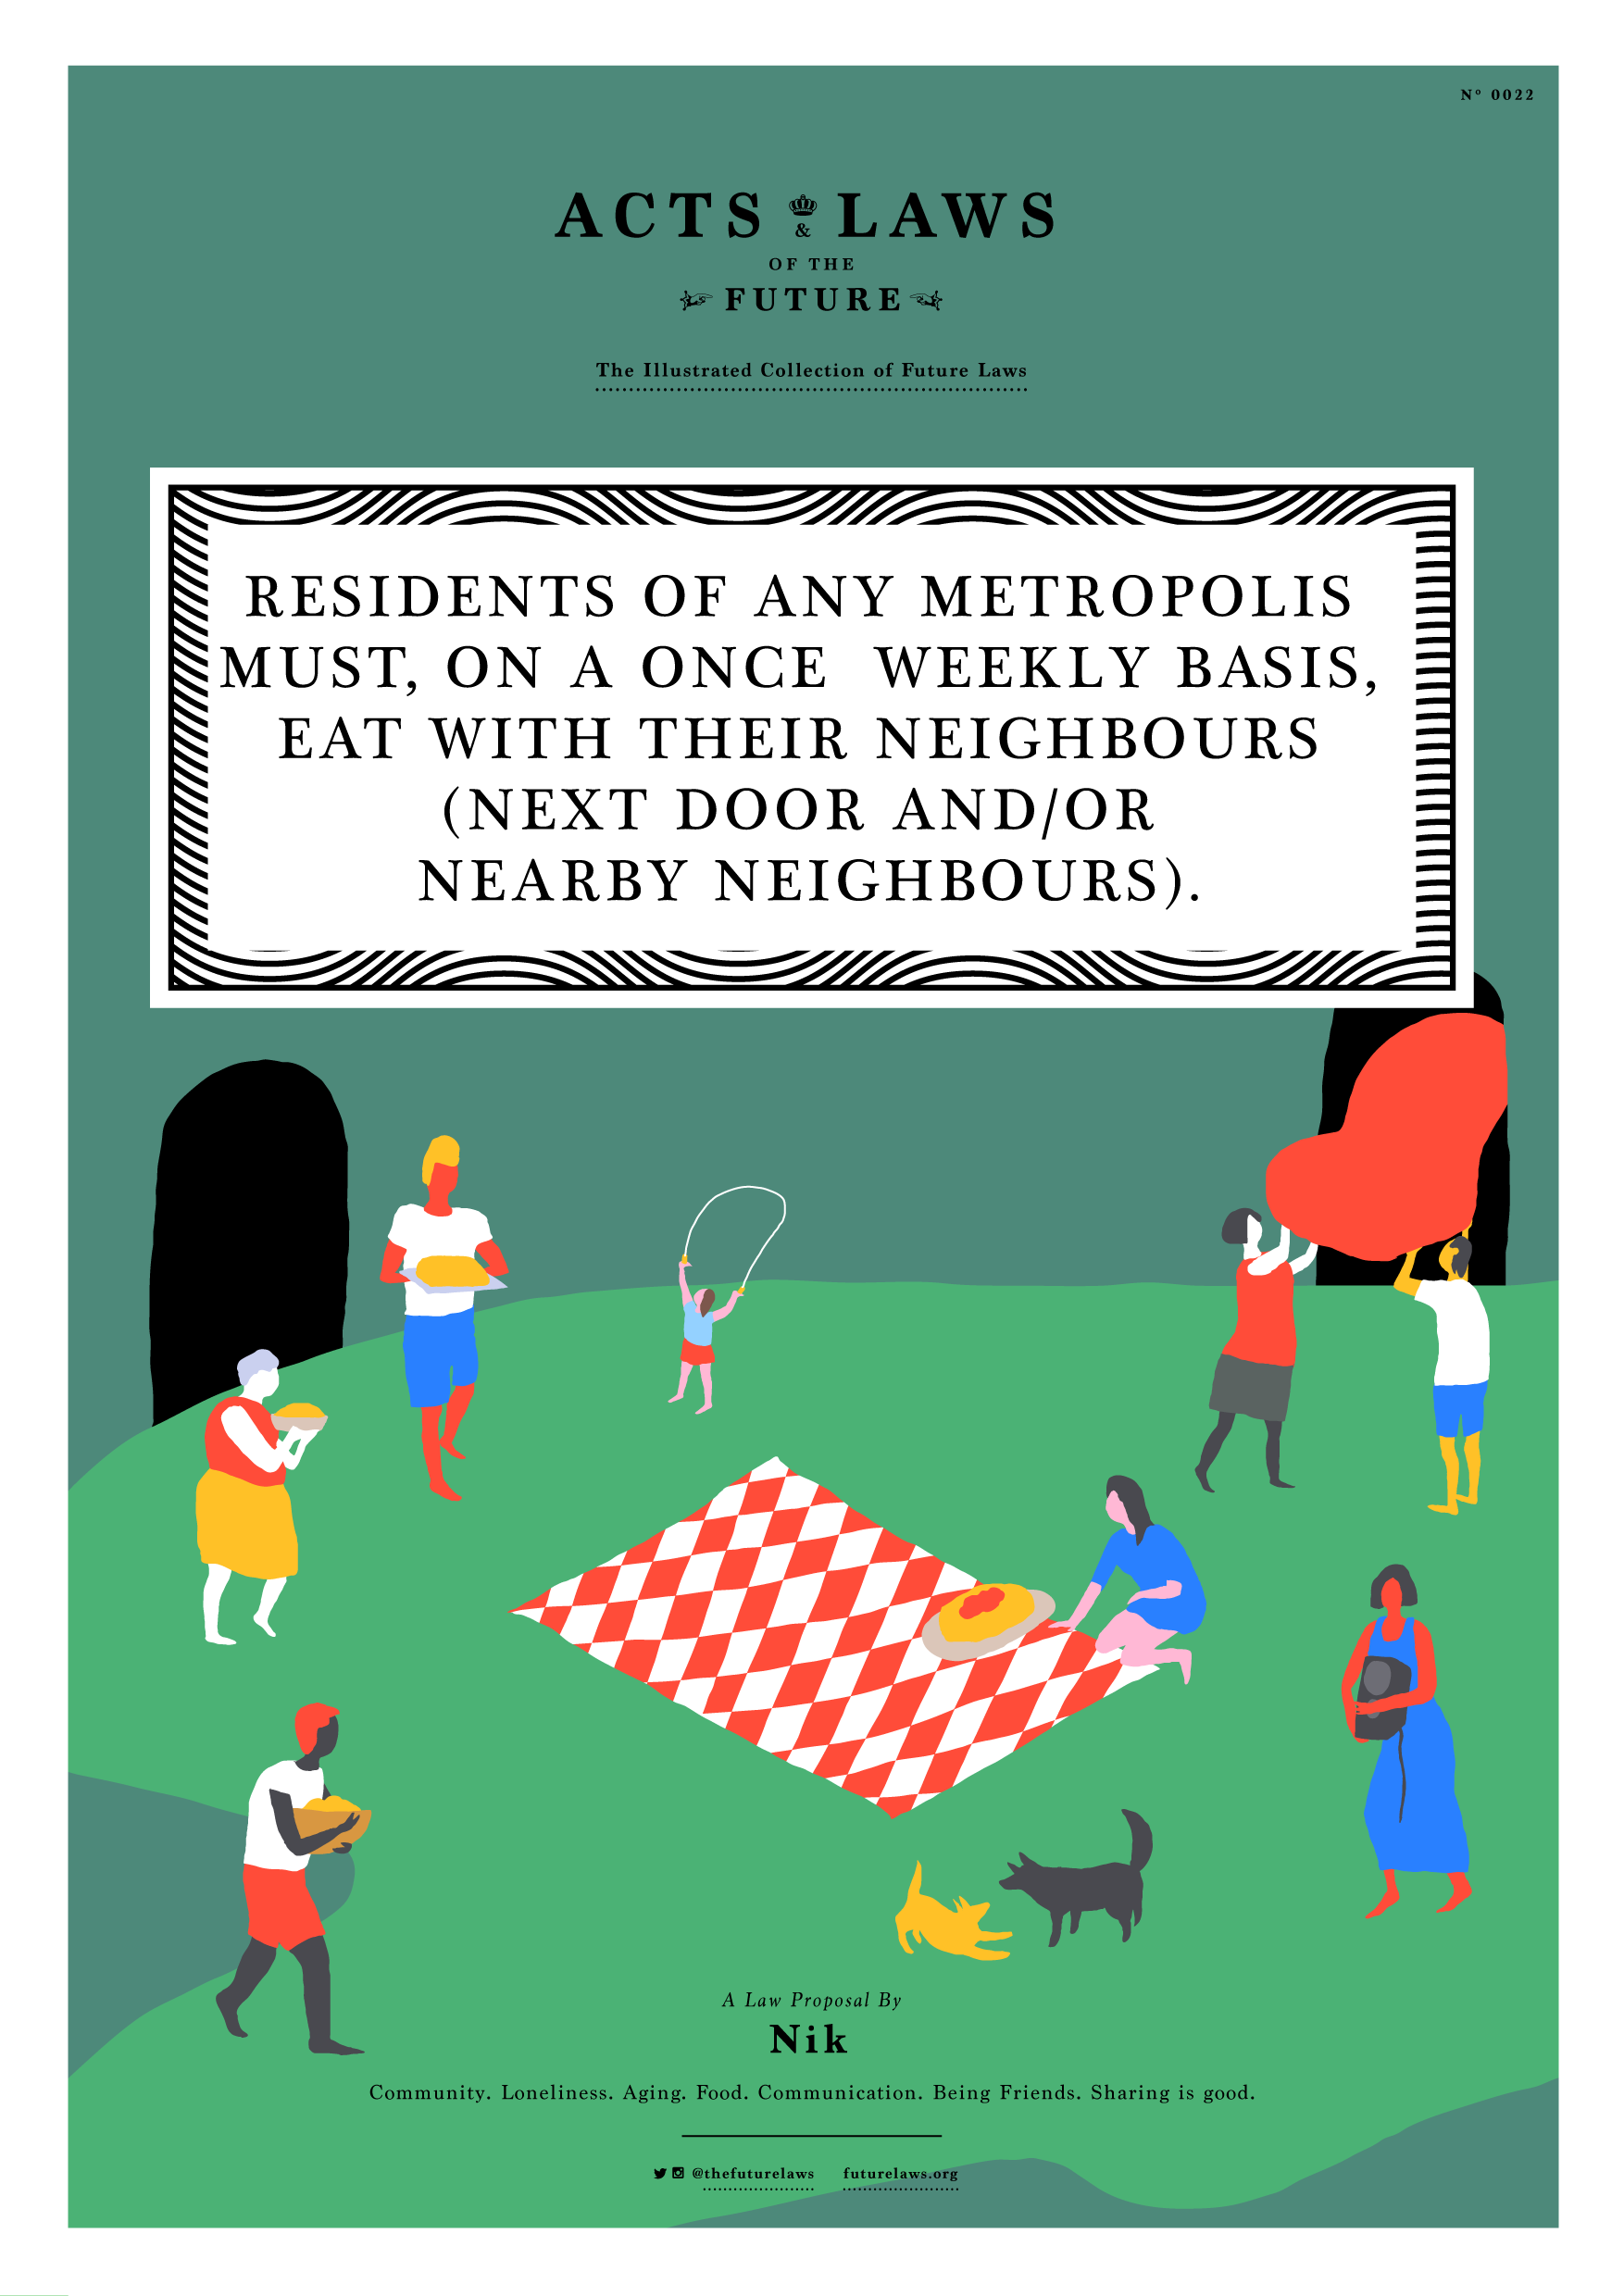 Residents of any metropolis must, on a once weekly basis, eat with their neighbours (next door and/or nearby neighbours).